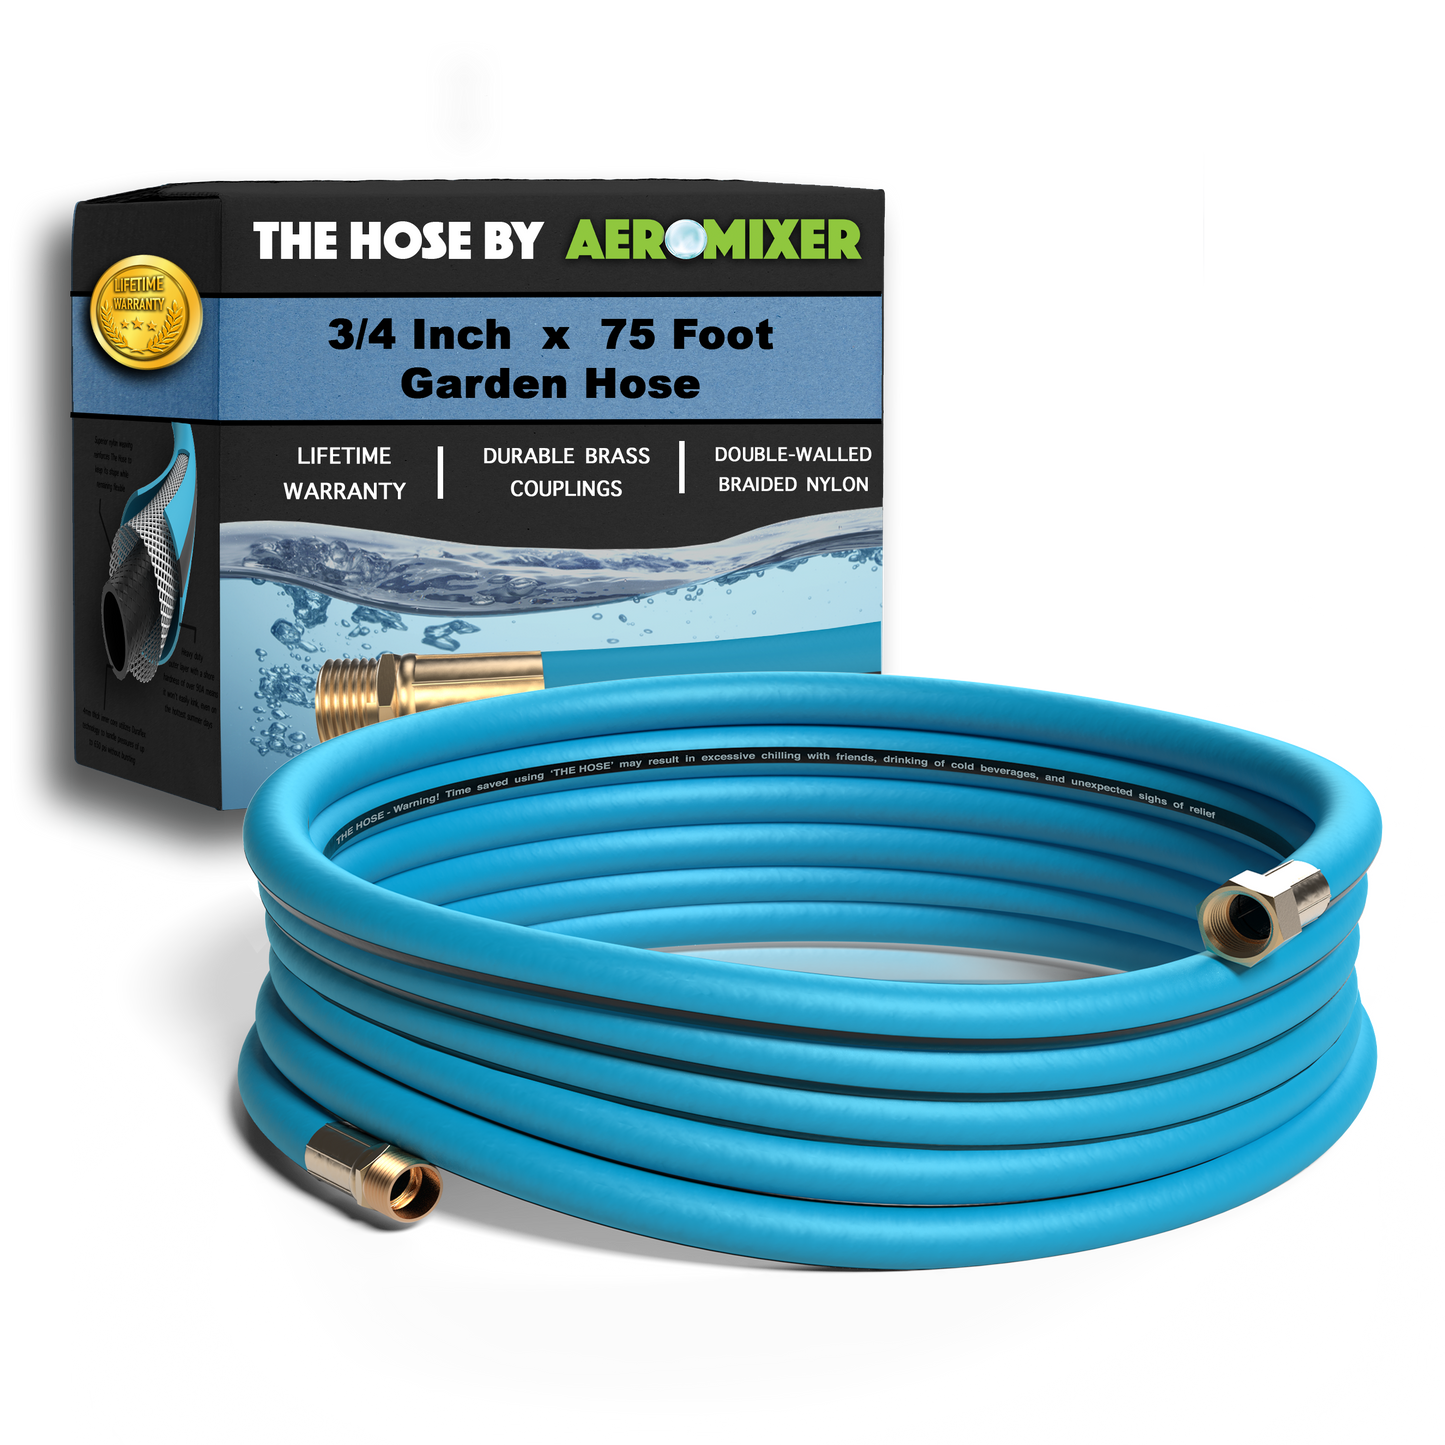 THE HOSE: By Aeromixer